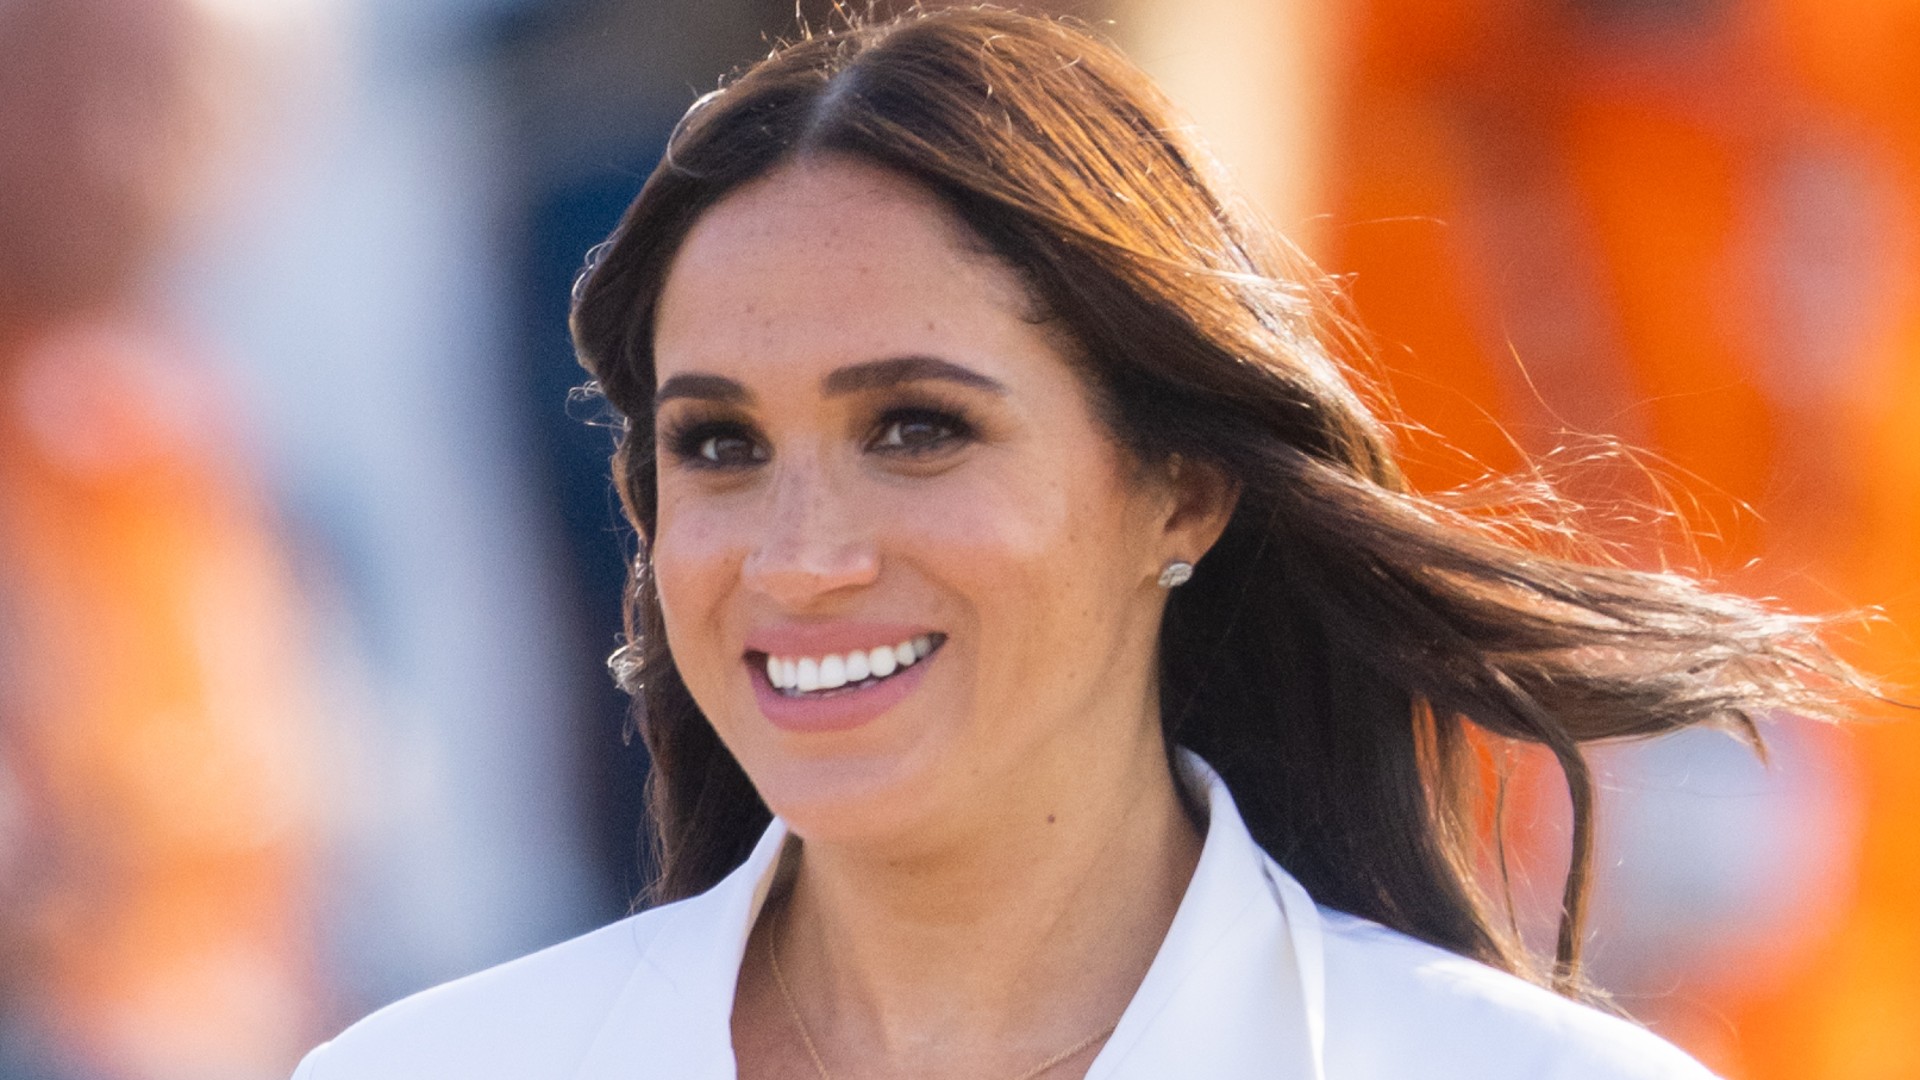 Meghan Markle Looks Classically Chic on Her Way to Yoga